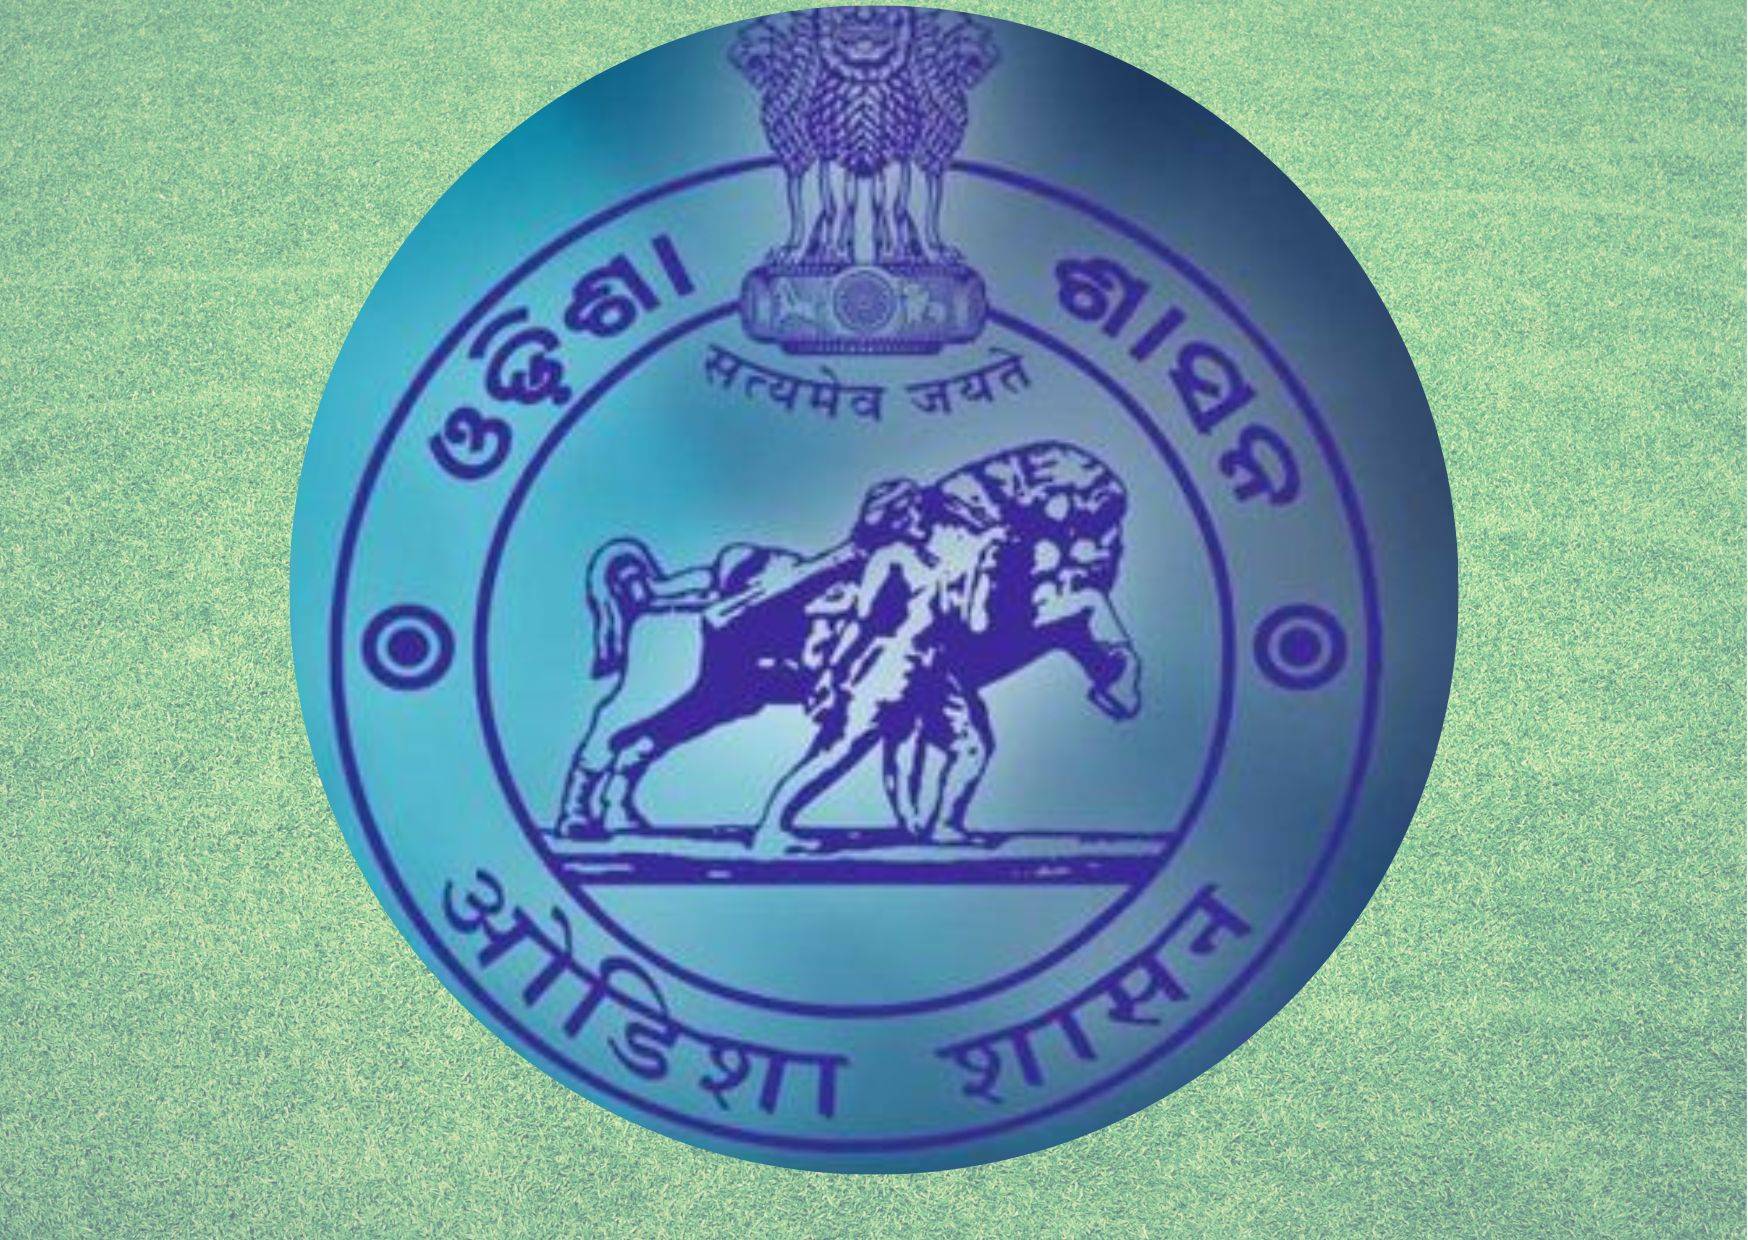 Odisha Govt appoints new chairpersons, advisors to different corporations, boards